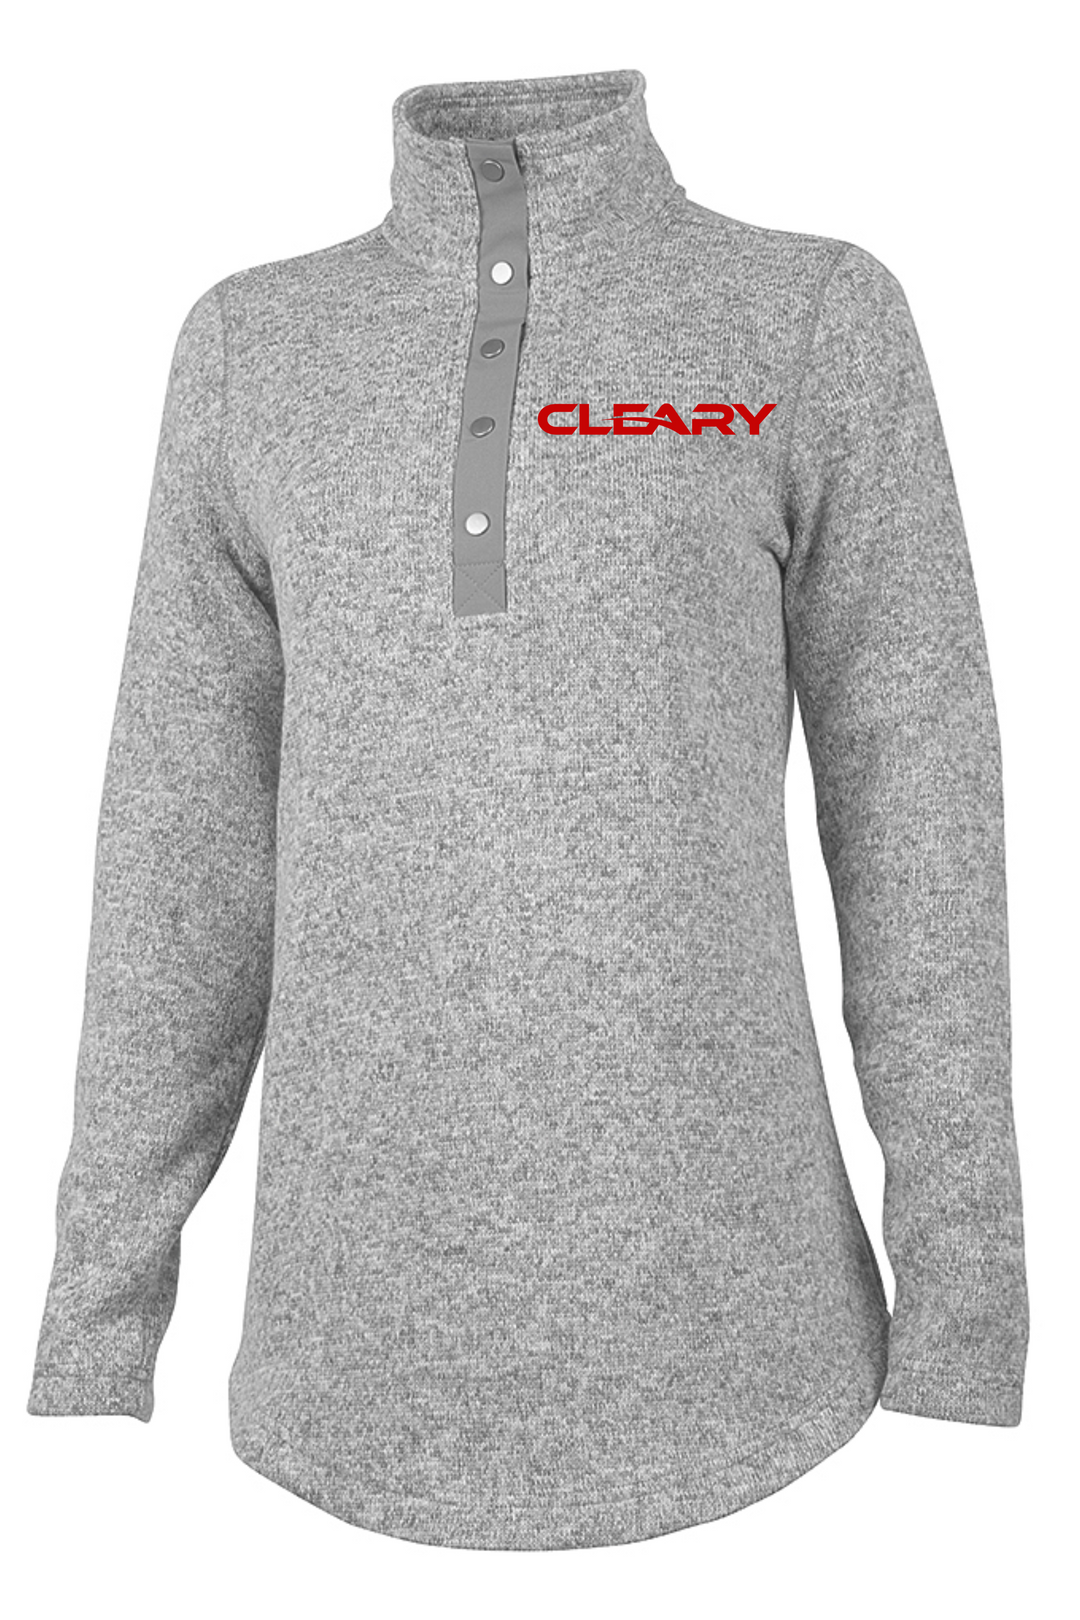 Cleary's Women's Hingham Tunic Light Grey Heather